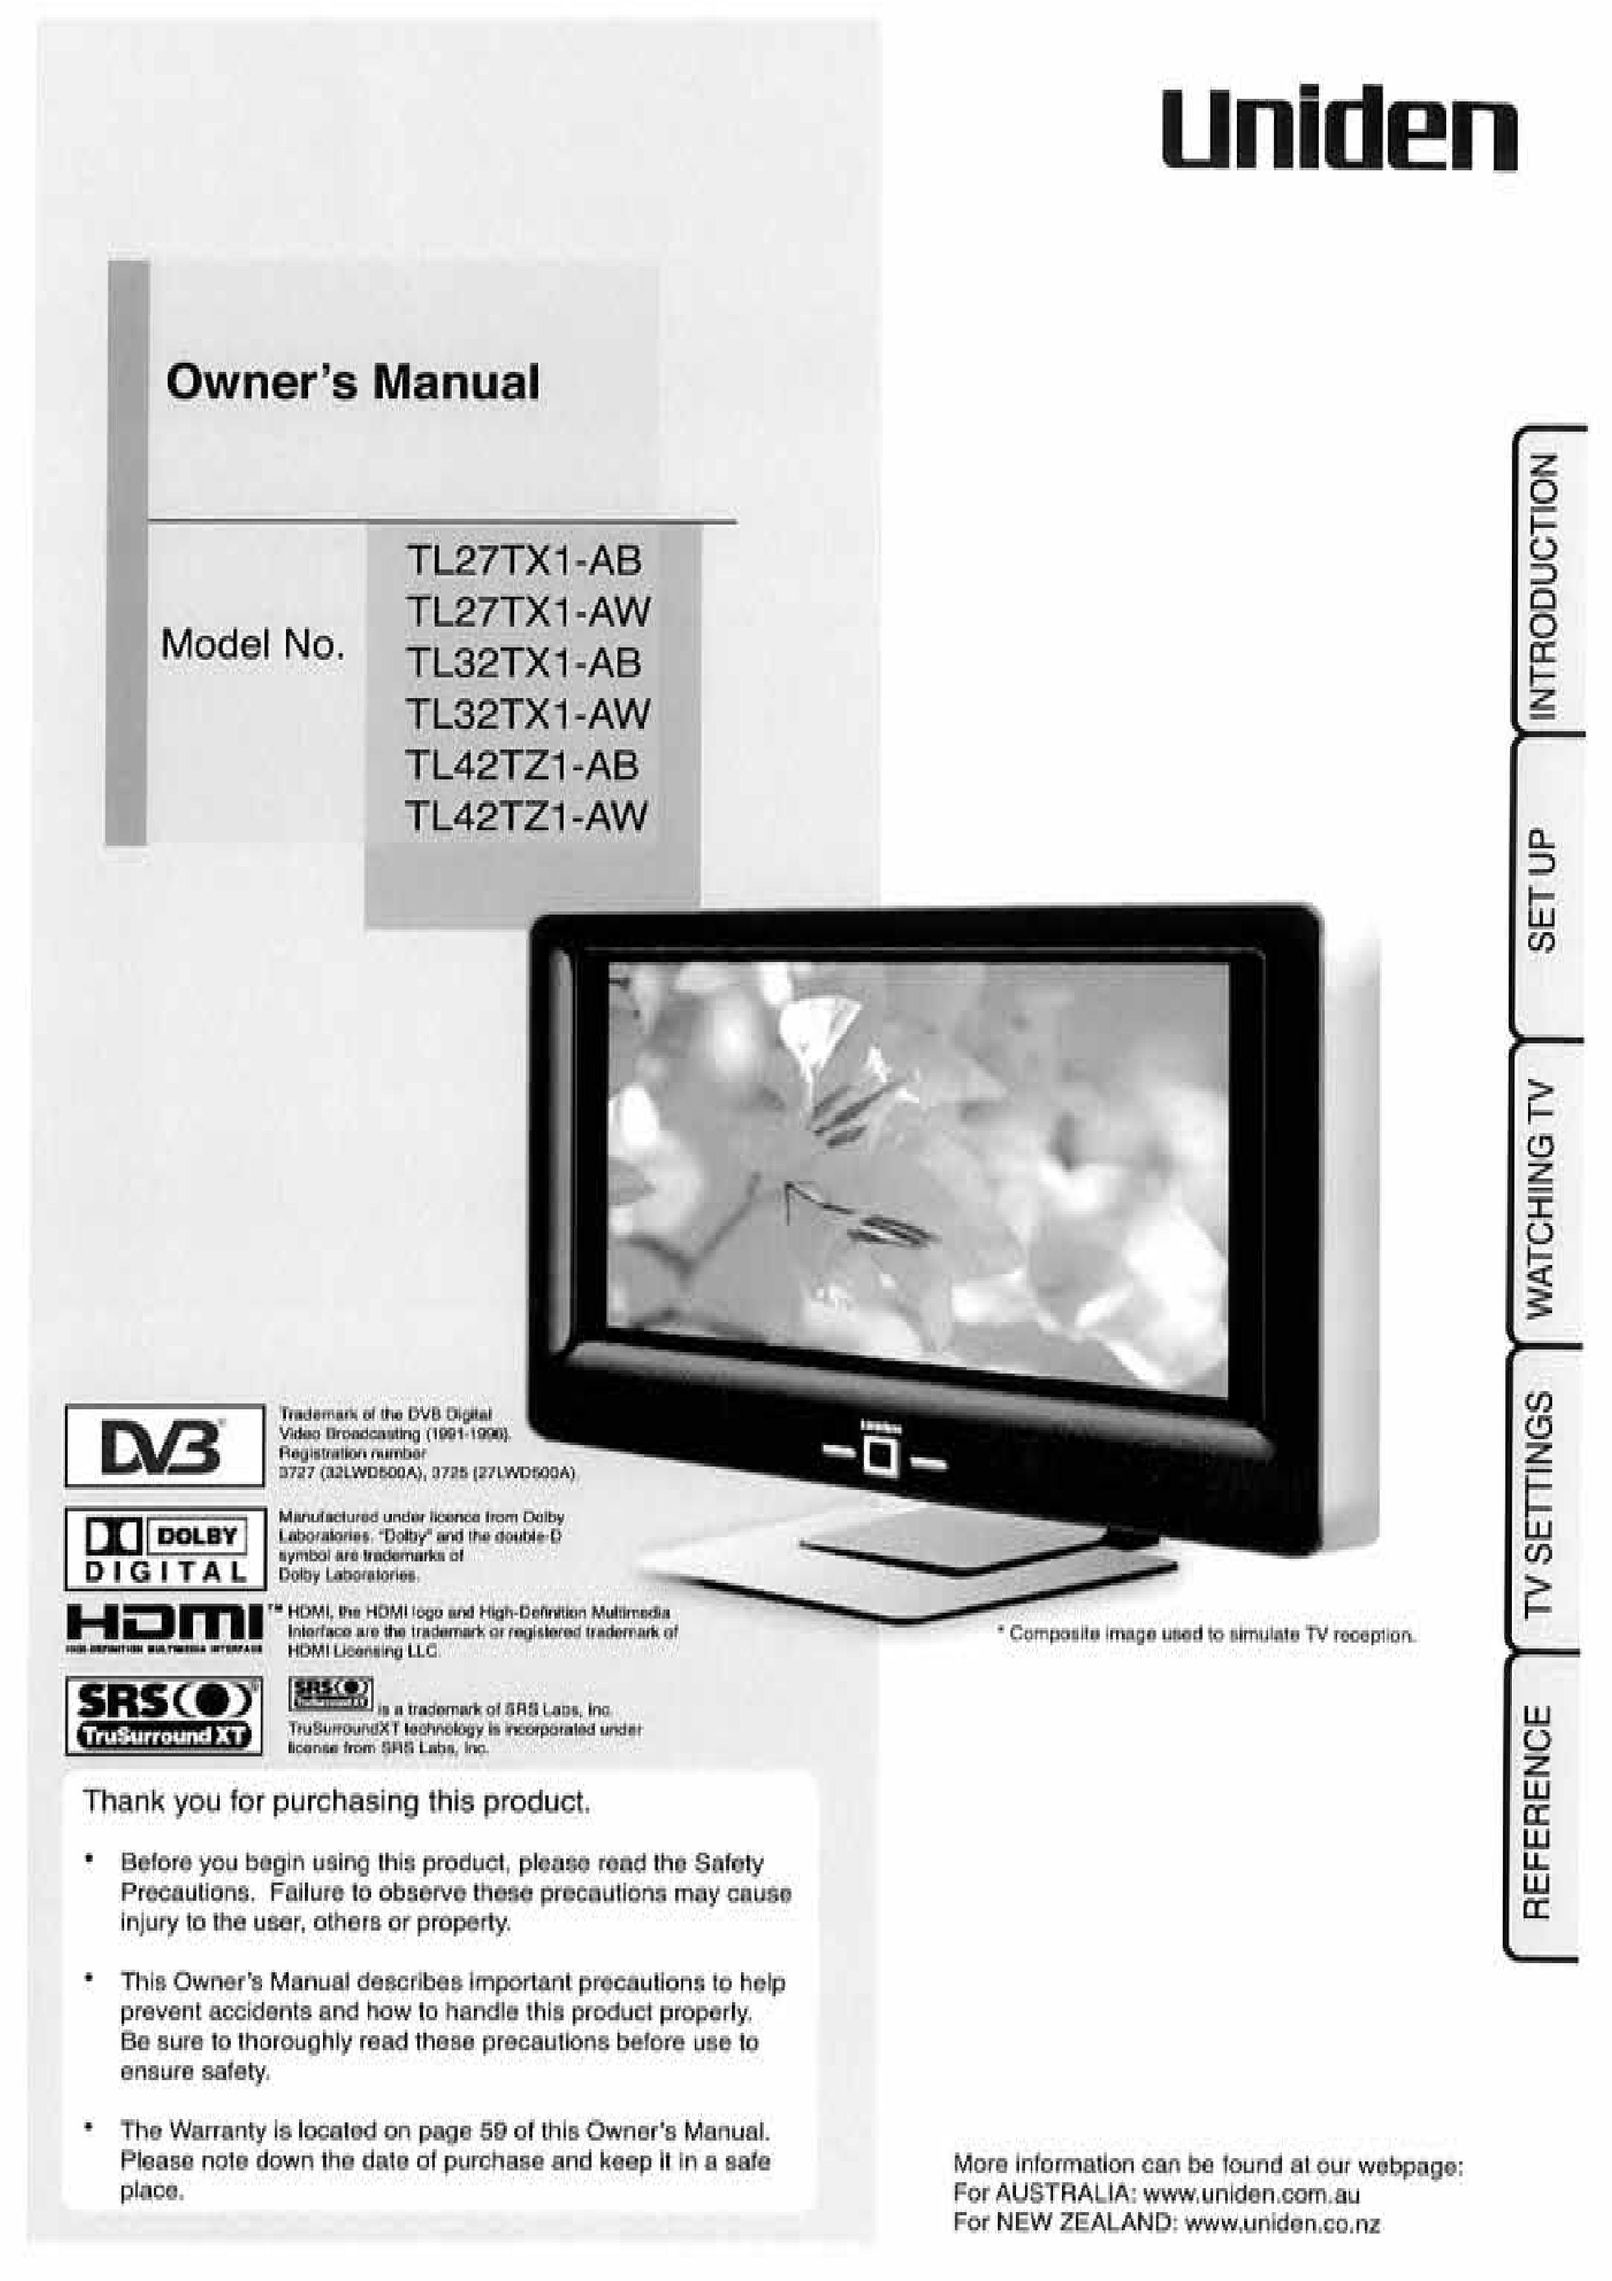 Uniden TL27TX1-AW Flat Panel Television User Manual